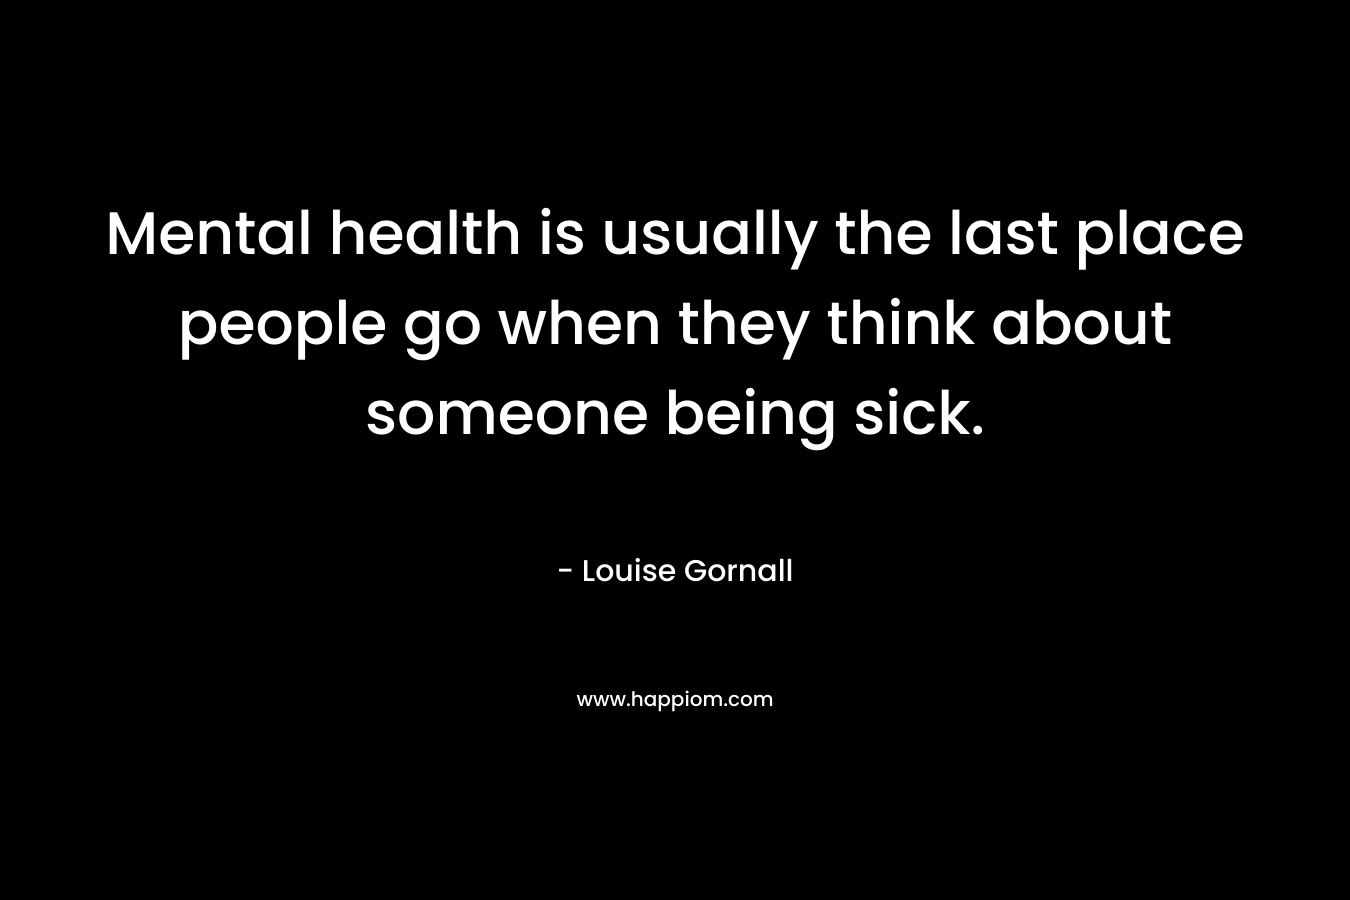 Mental health is usually the last place people go when they think about someone being sick. – Louise Gornall